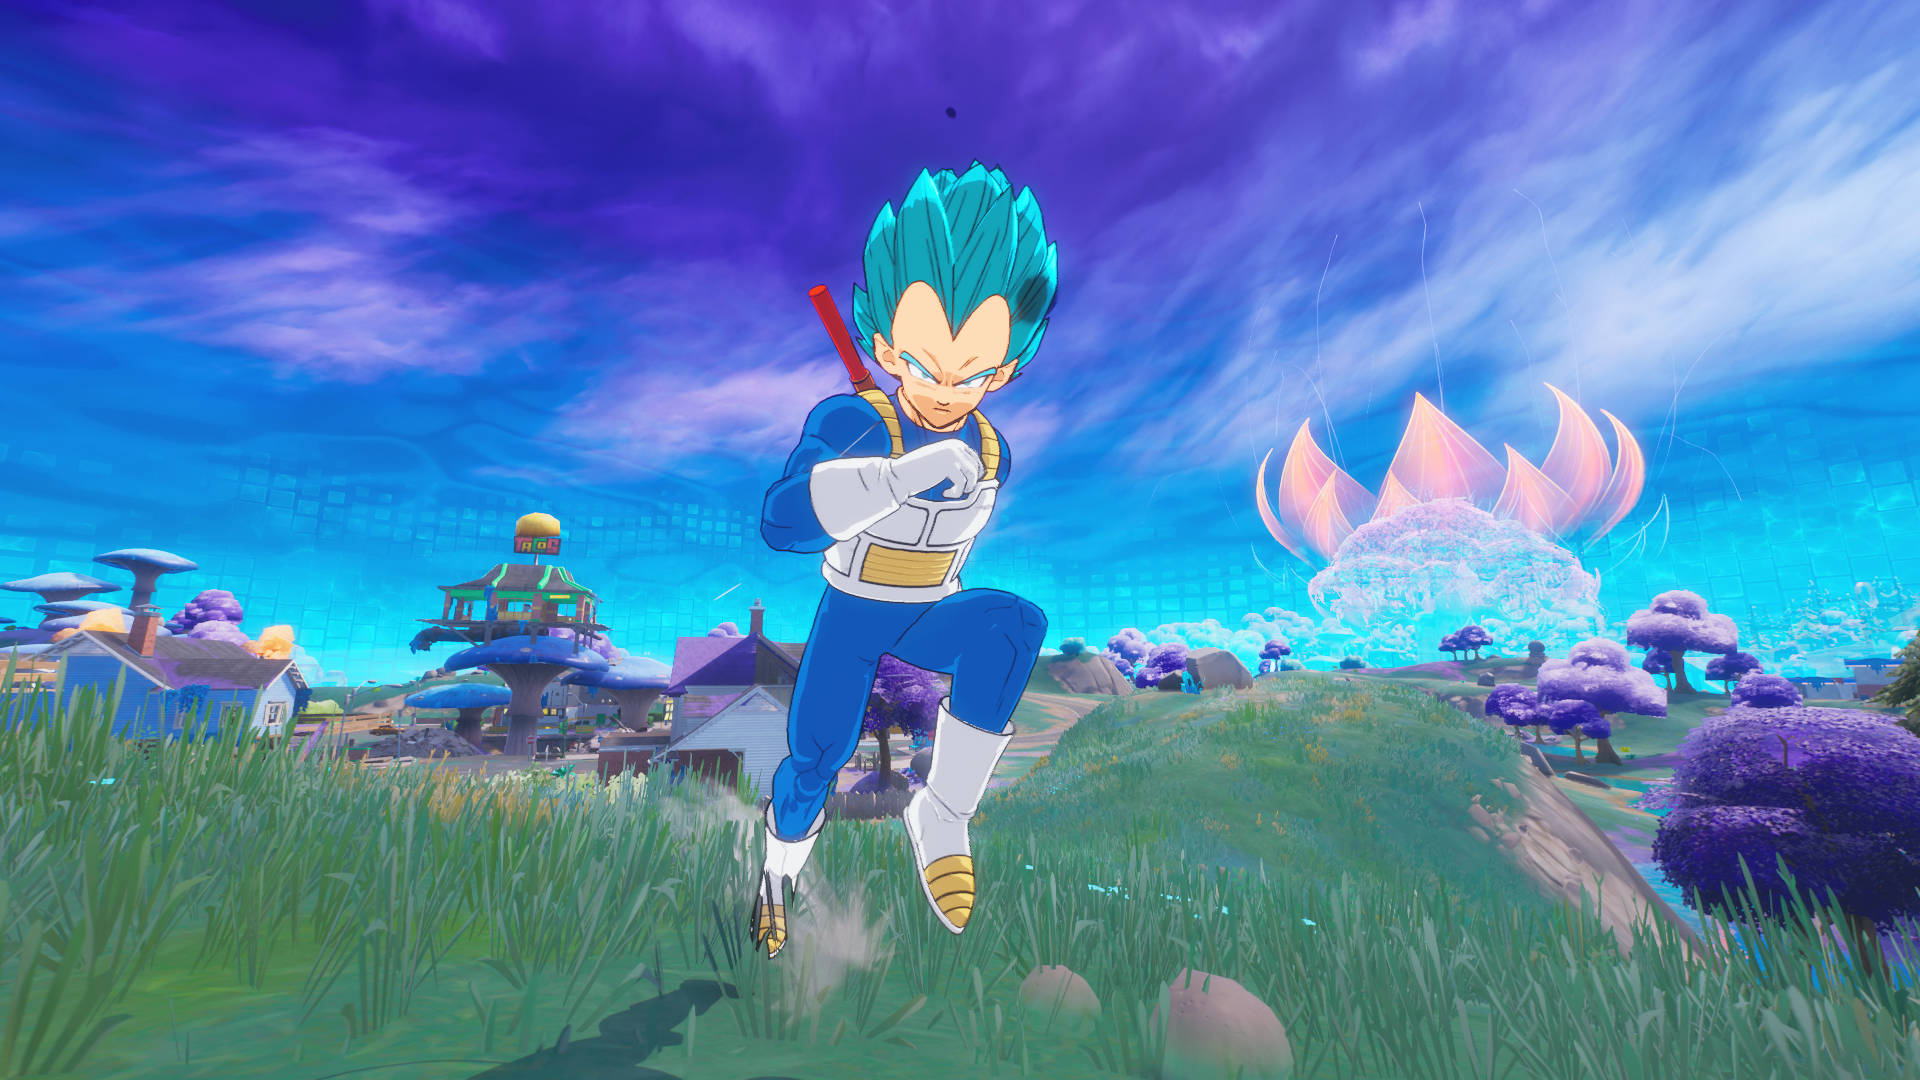 What to know about Fortnite x Dragon Ball Z: Skins, quests and more